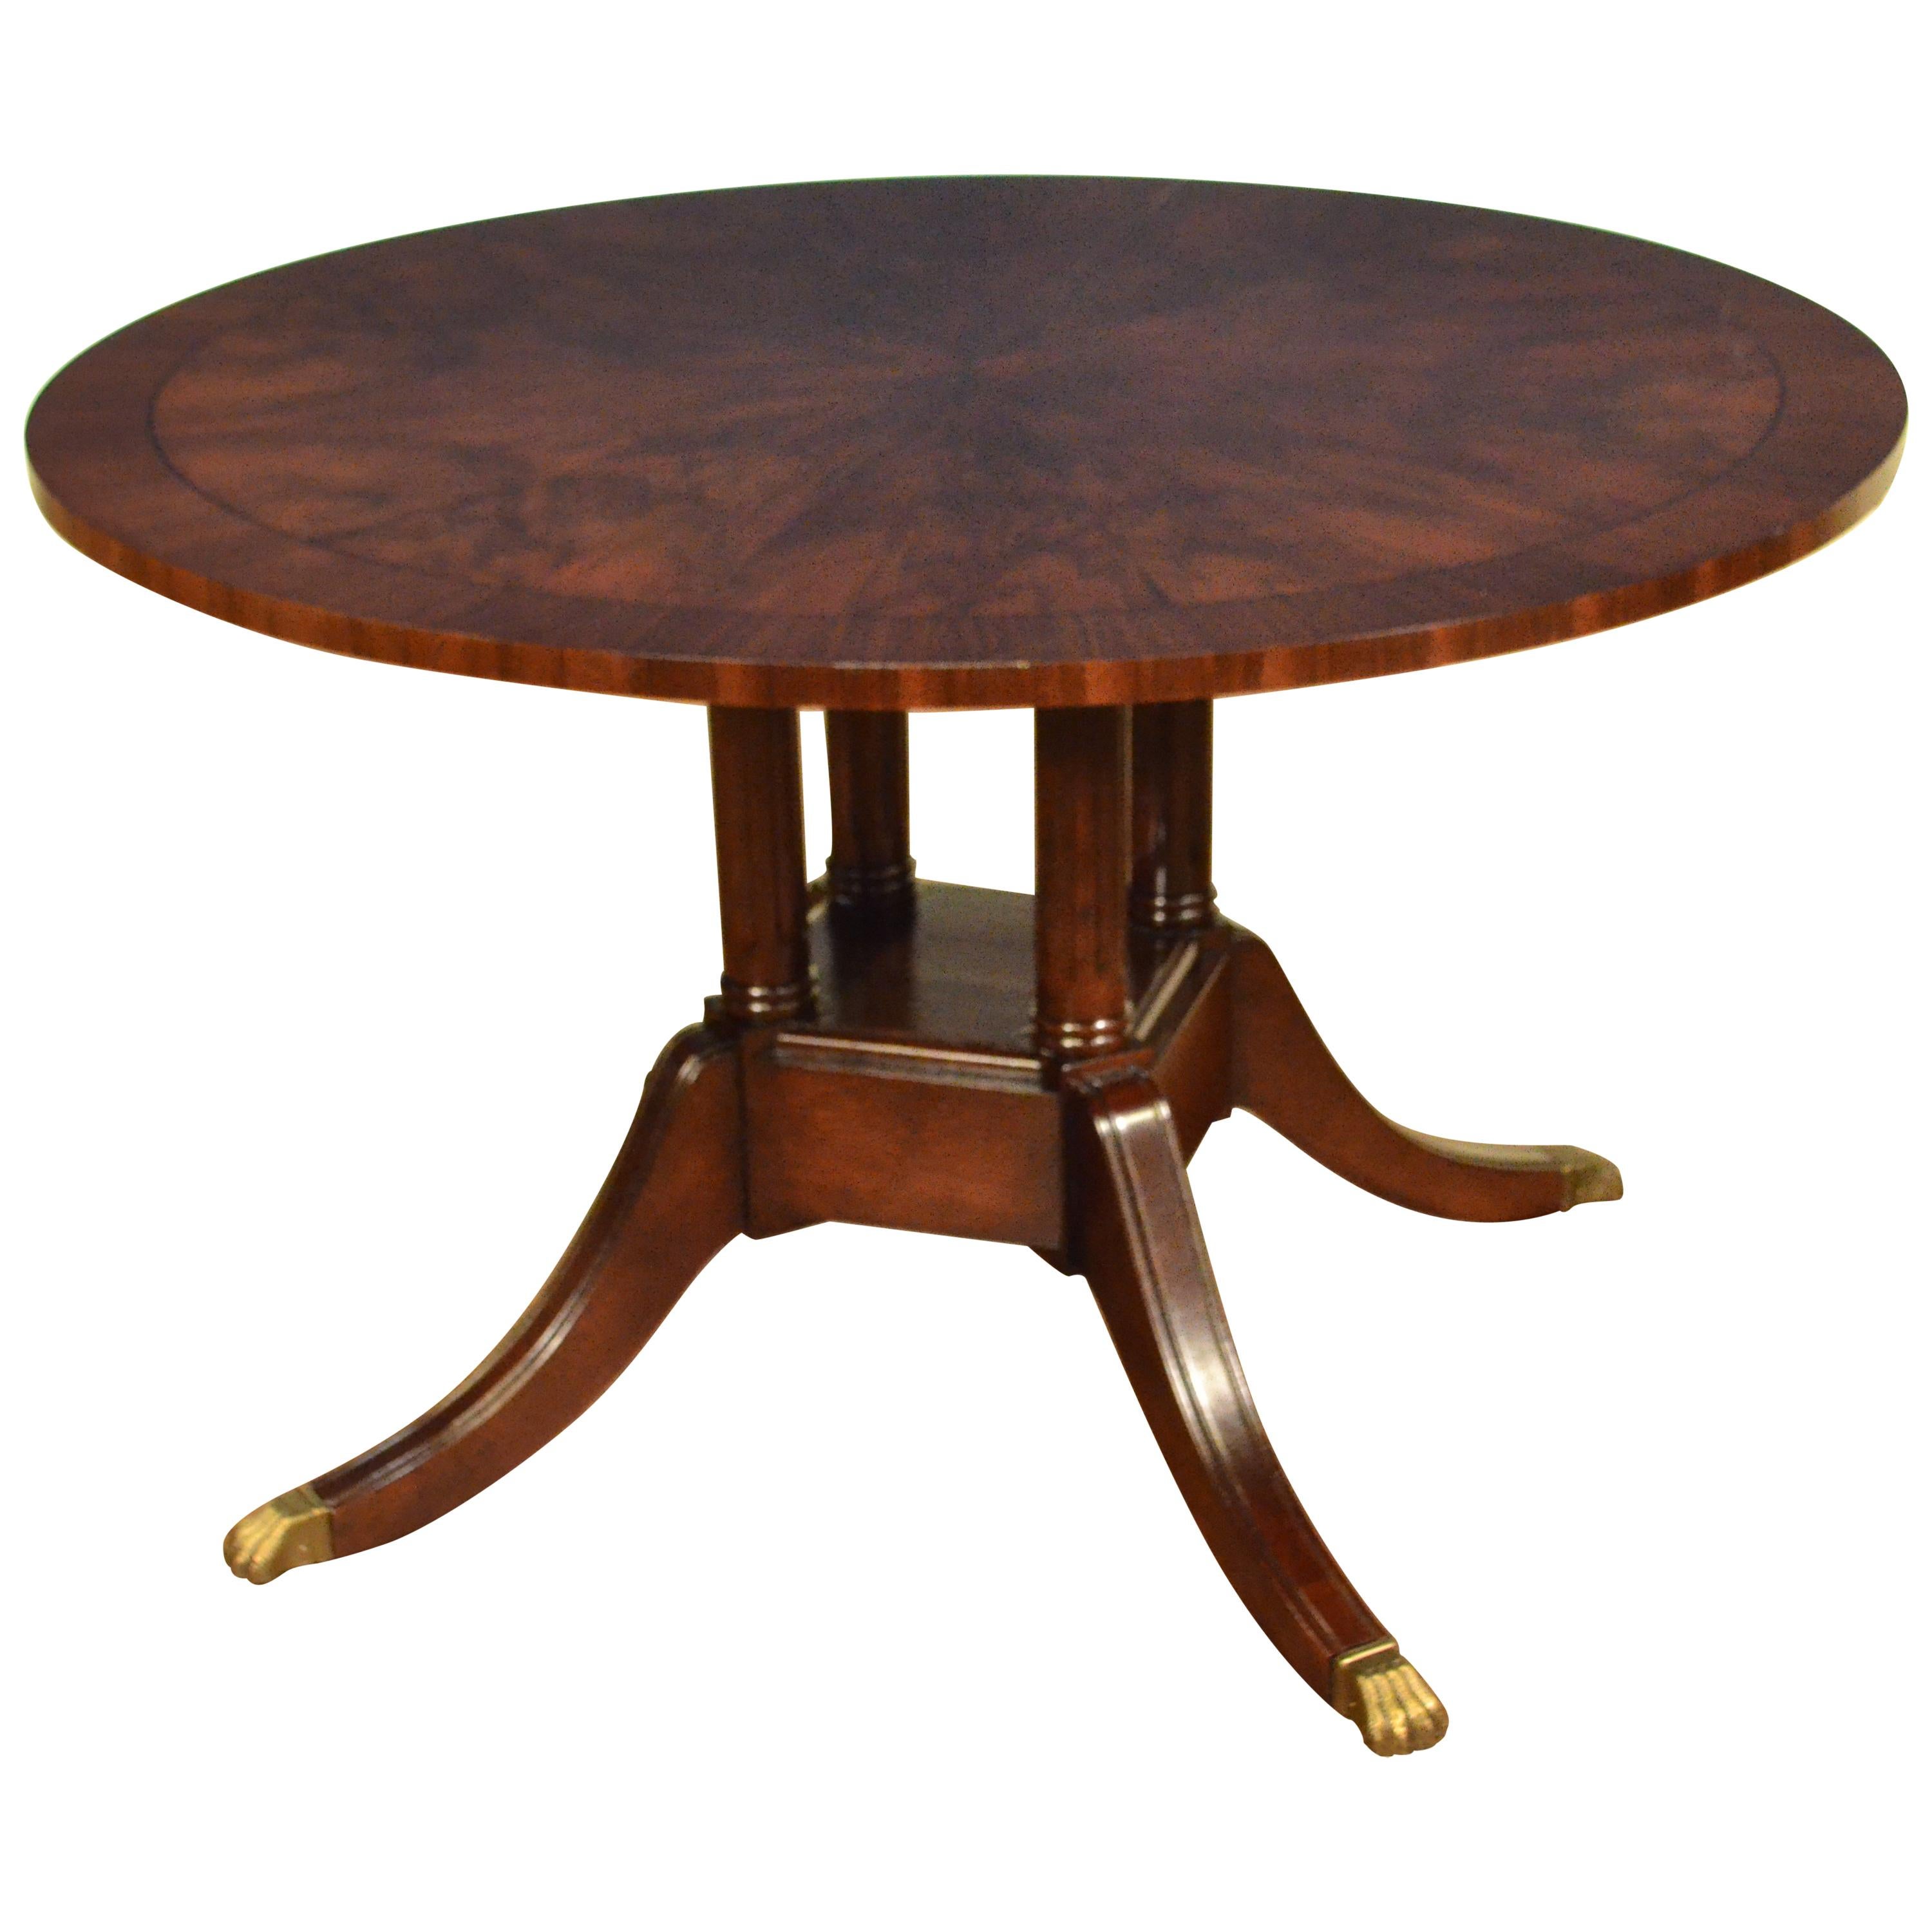 Round Walnut Georgian Style Pedestal Dining Table by Leighton Hall For Sale